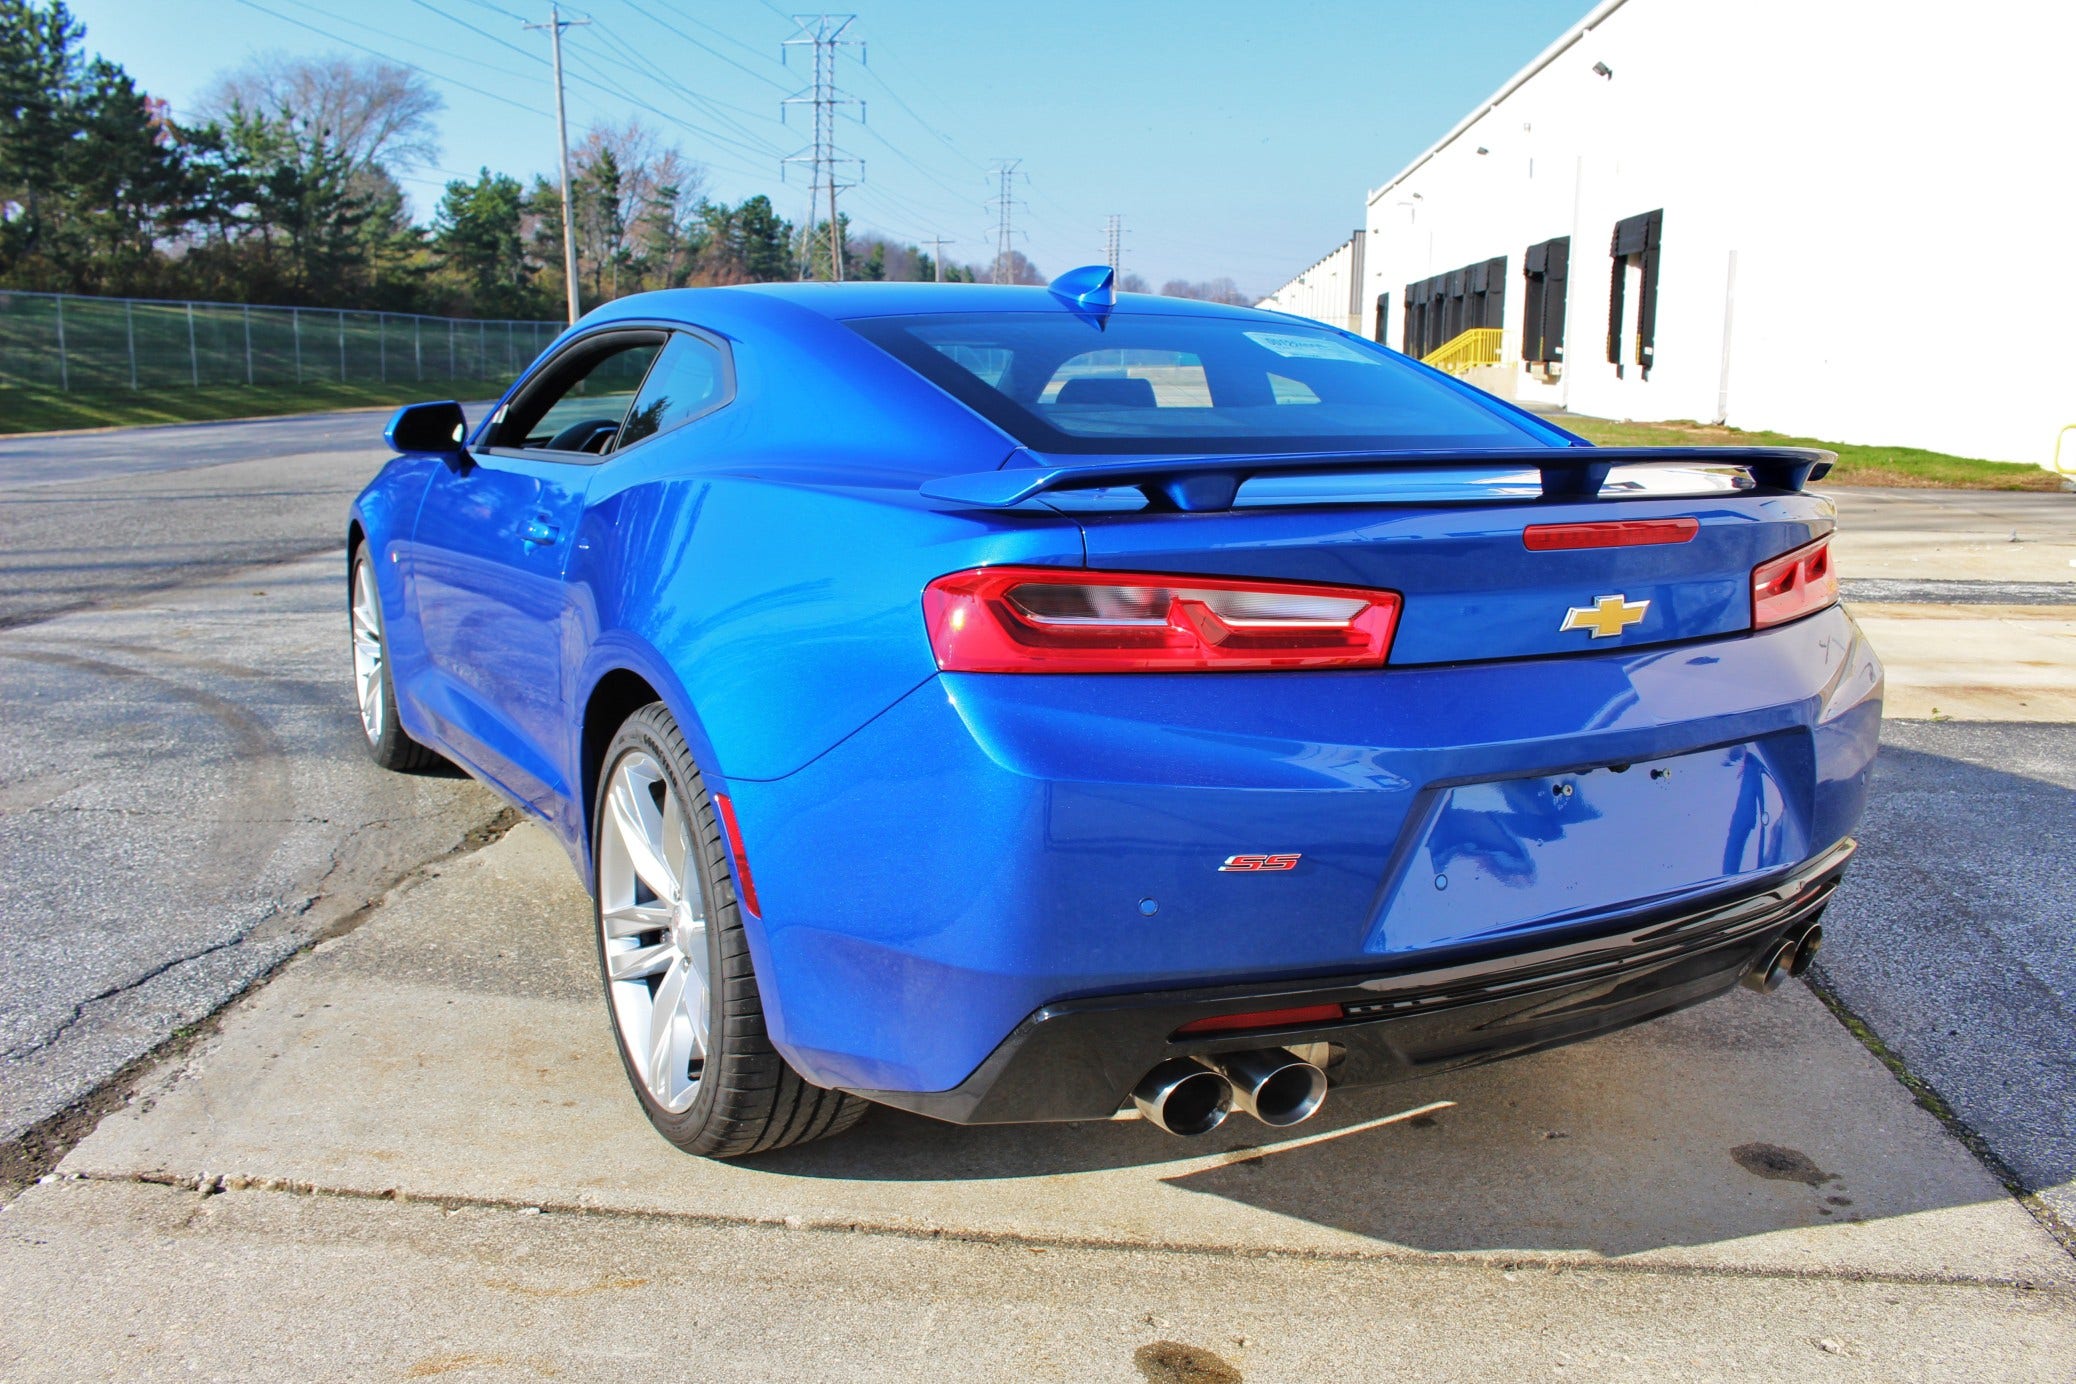 2016 Camaro SS Video Review Series, Part 2: On-Road Review